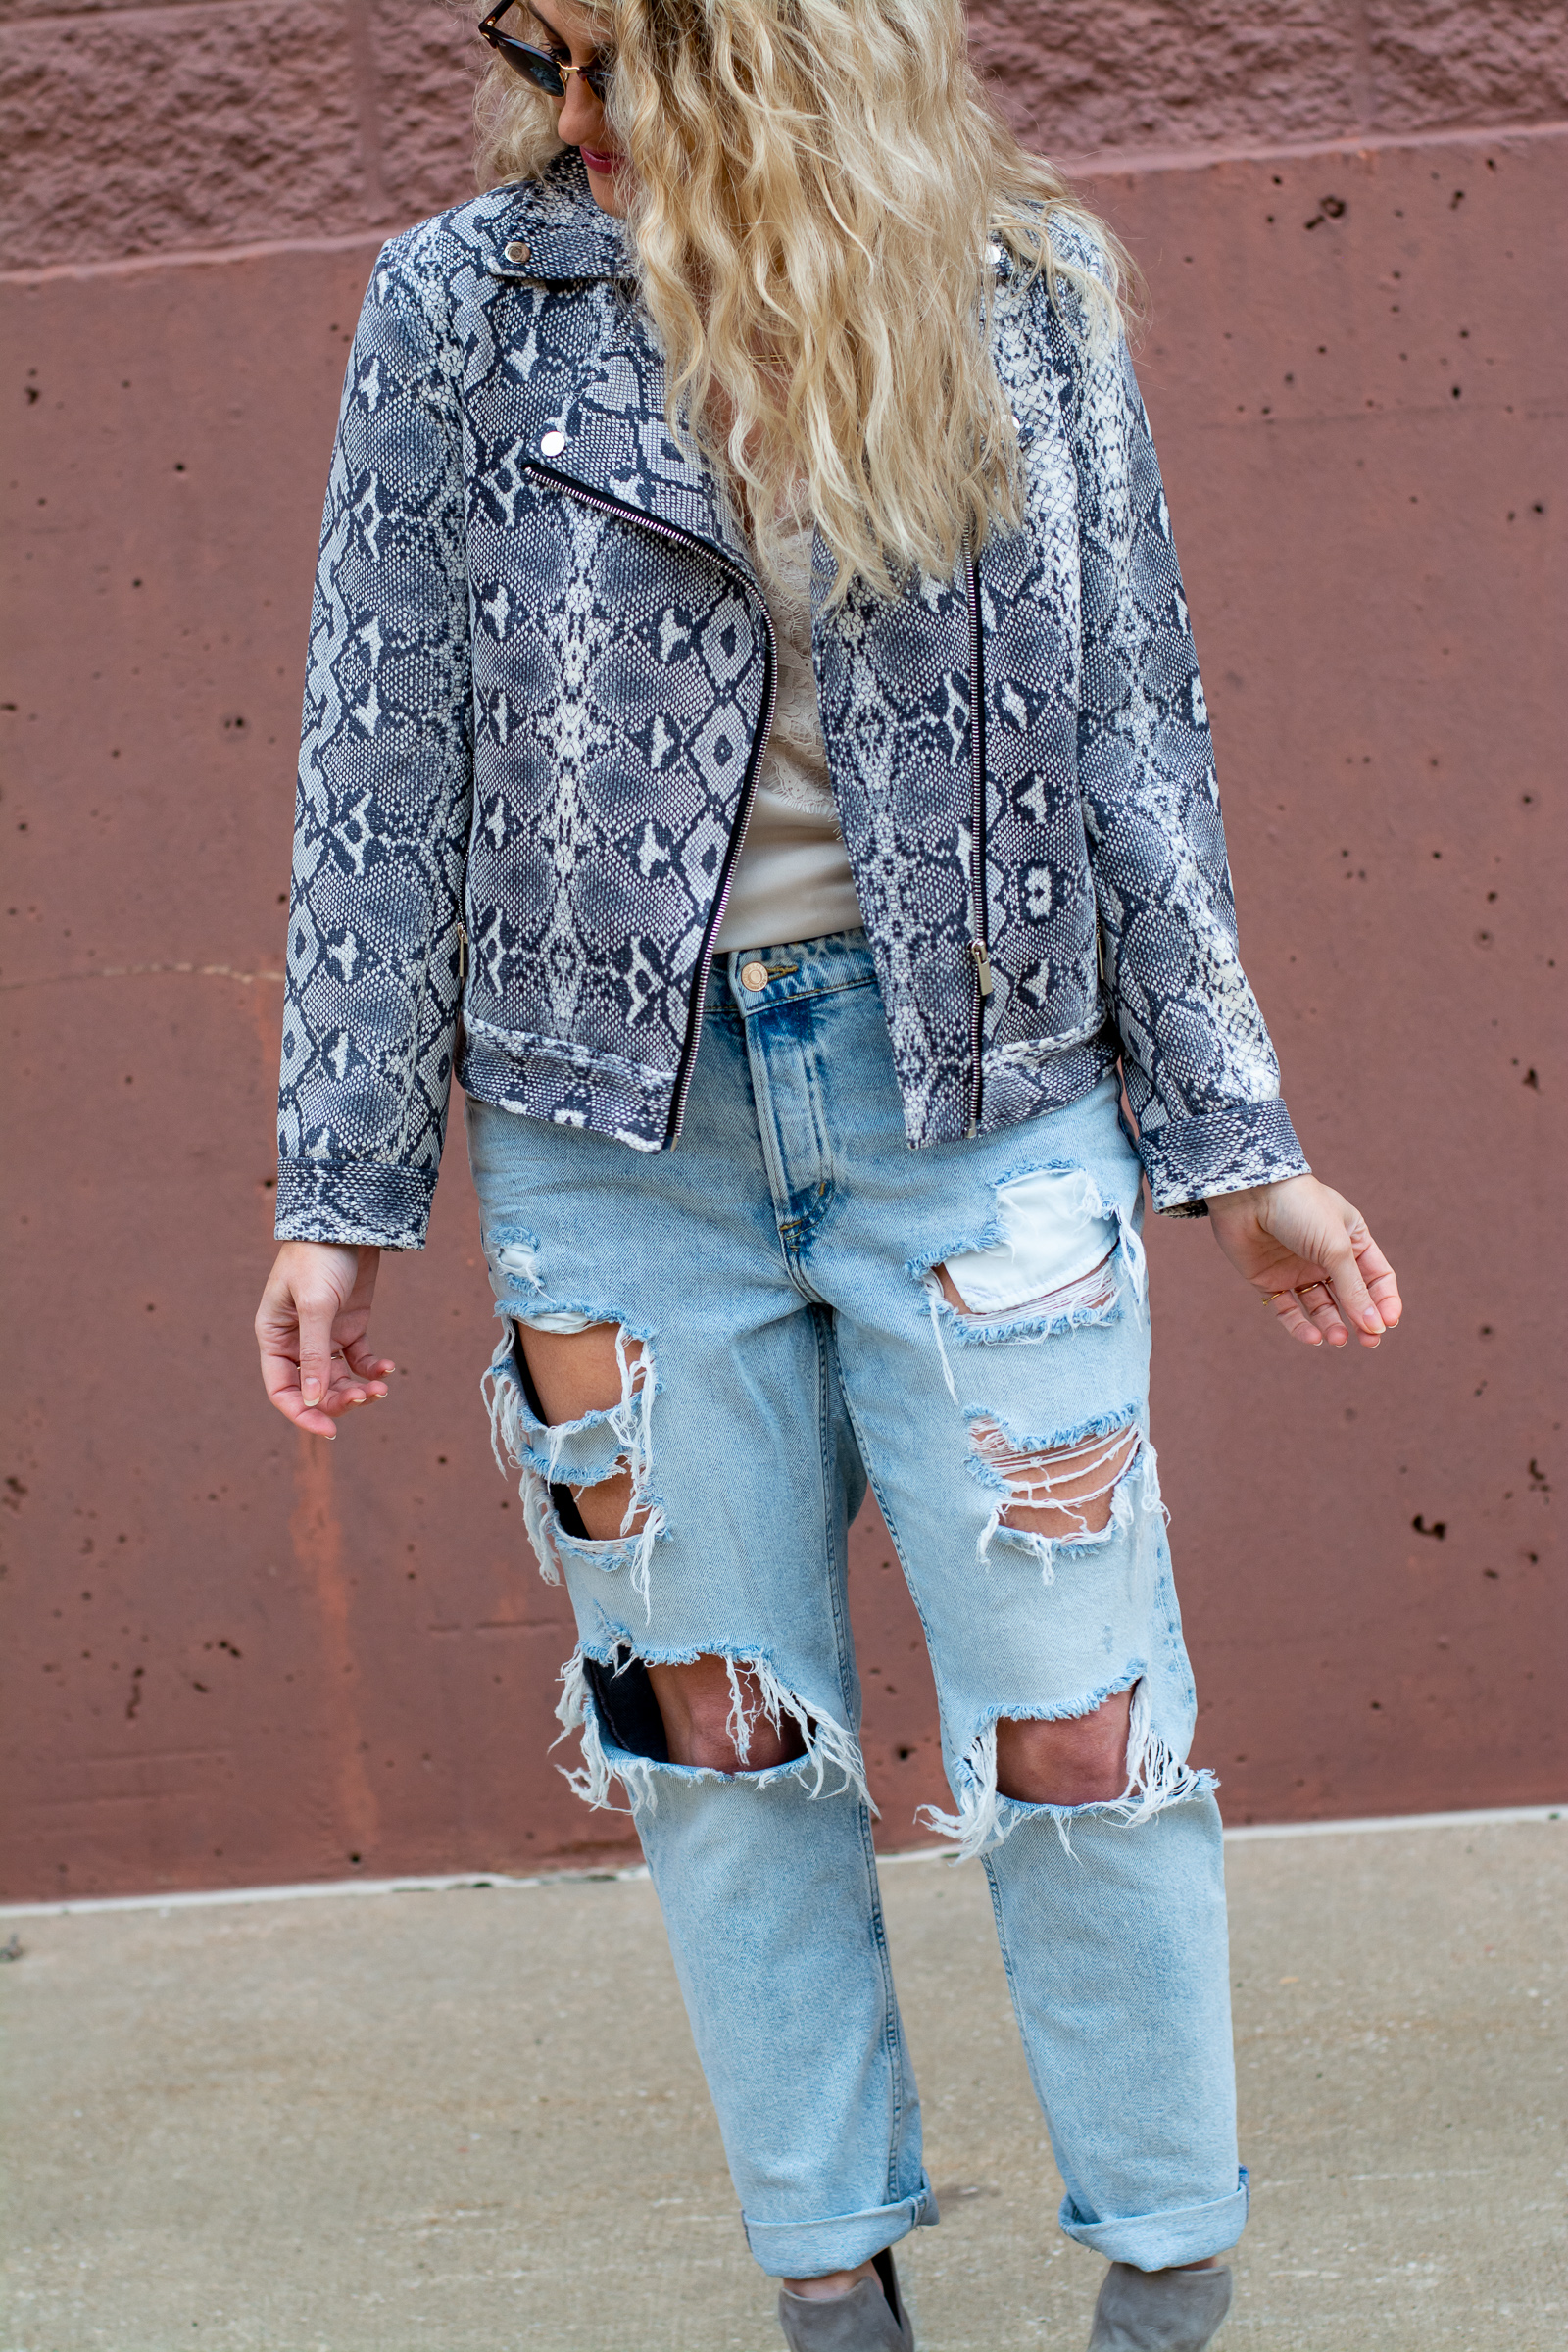 Fall Outfit: Lightweight Printed Jacket + Busted Jeans. | LSR